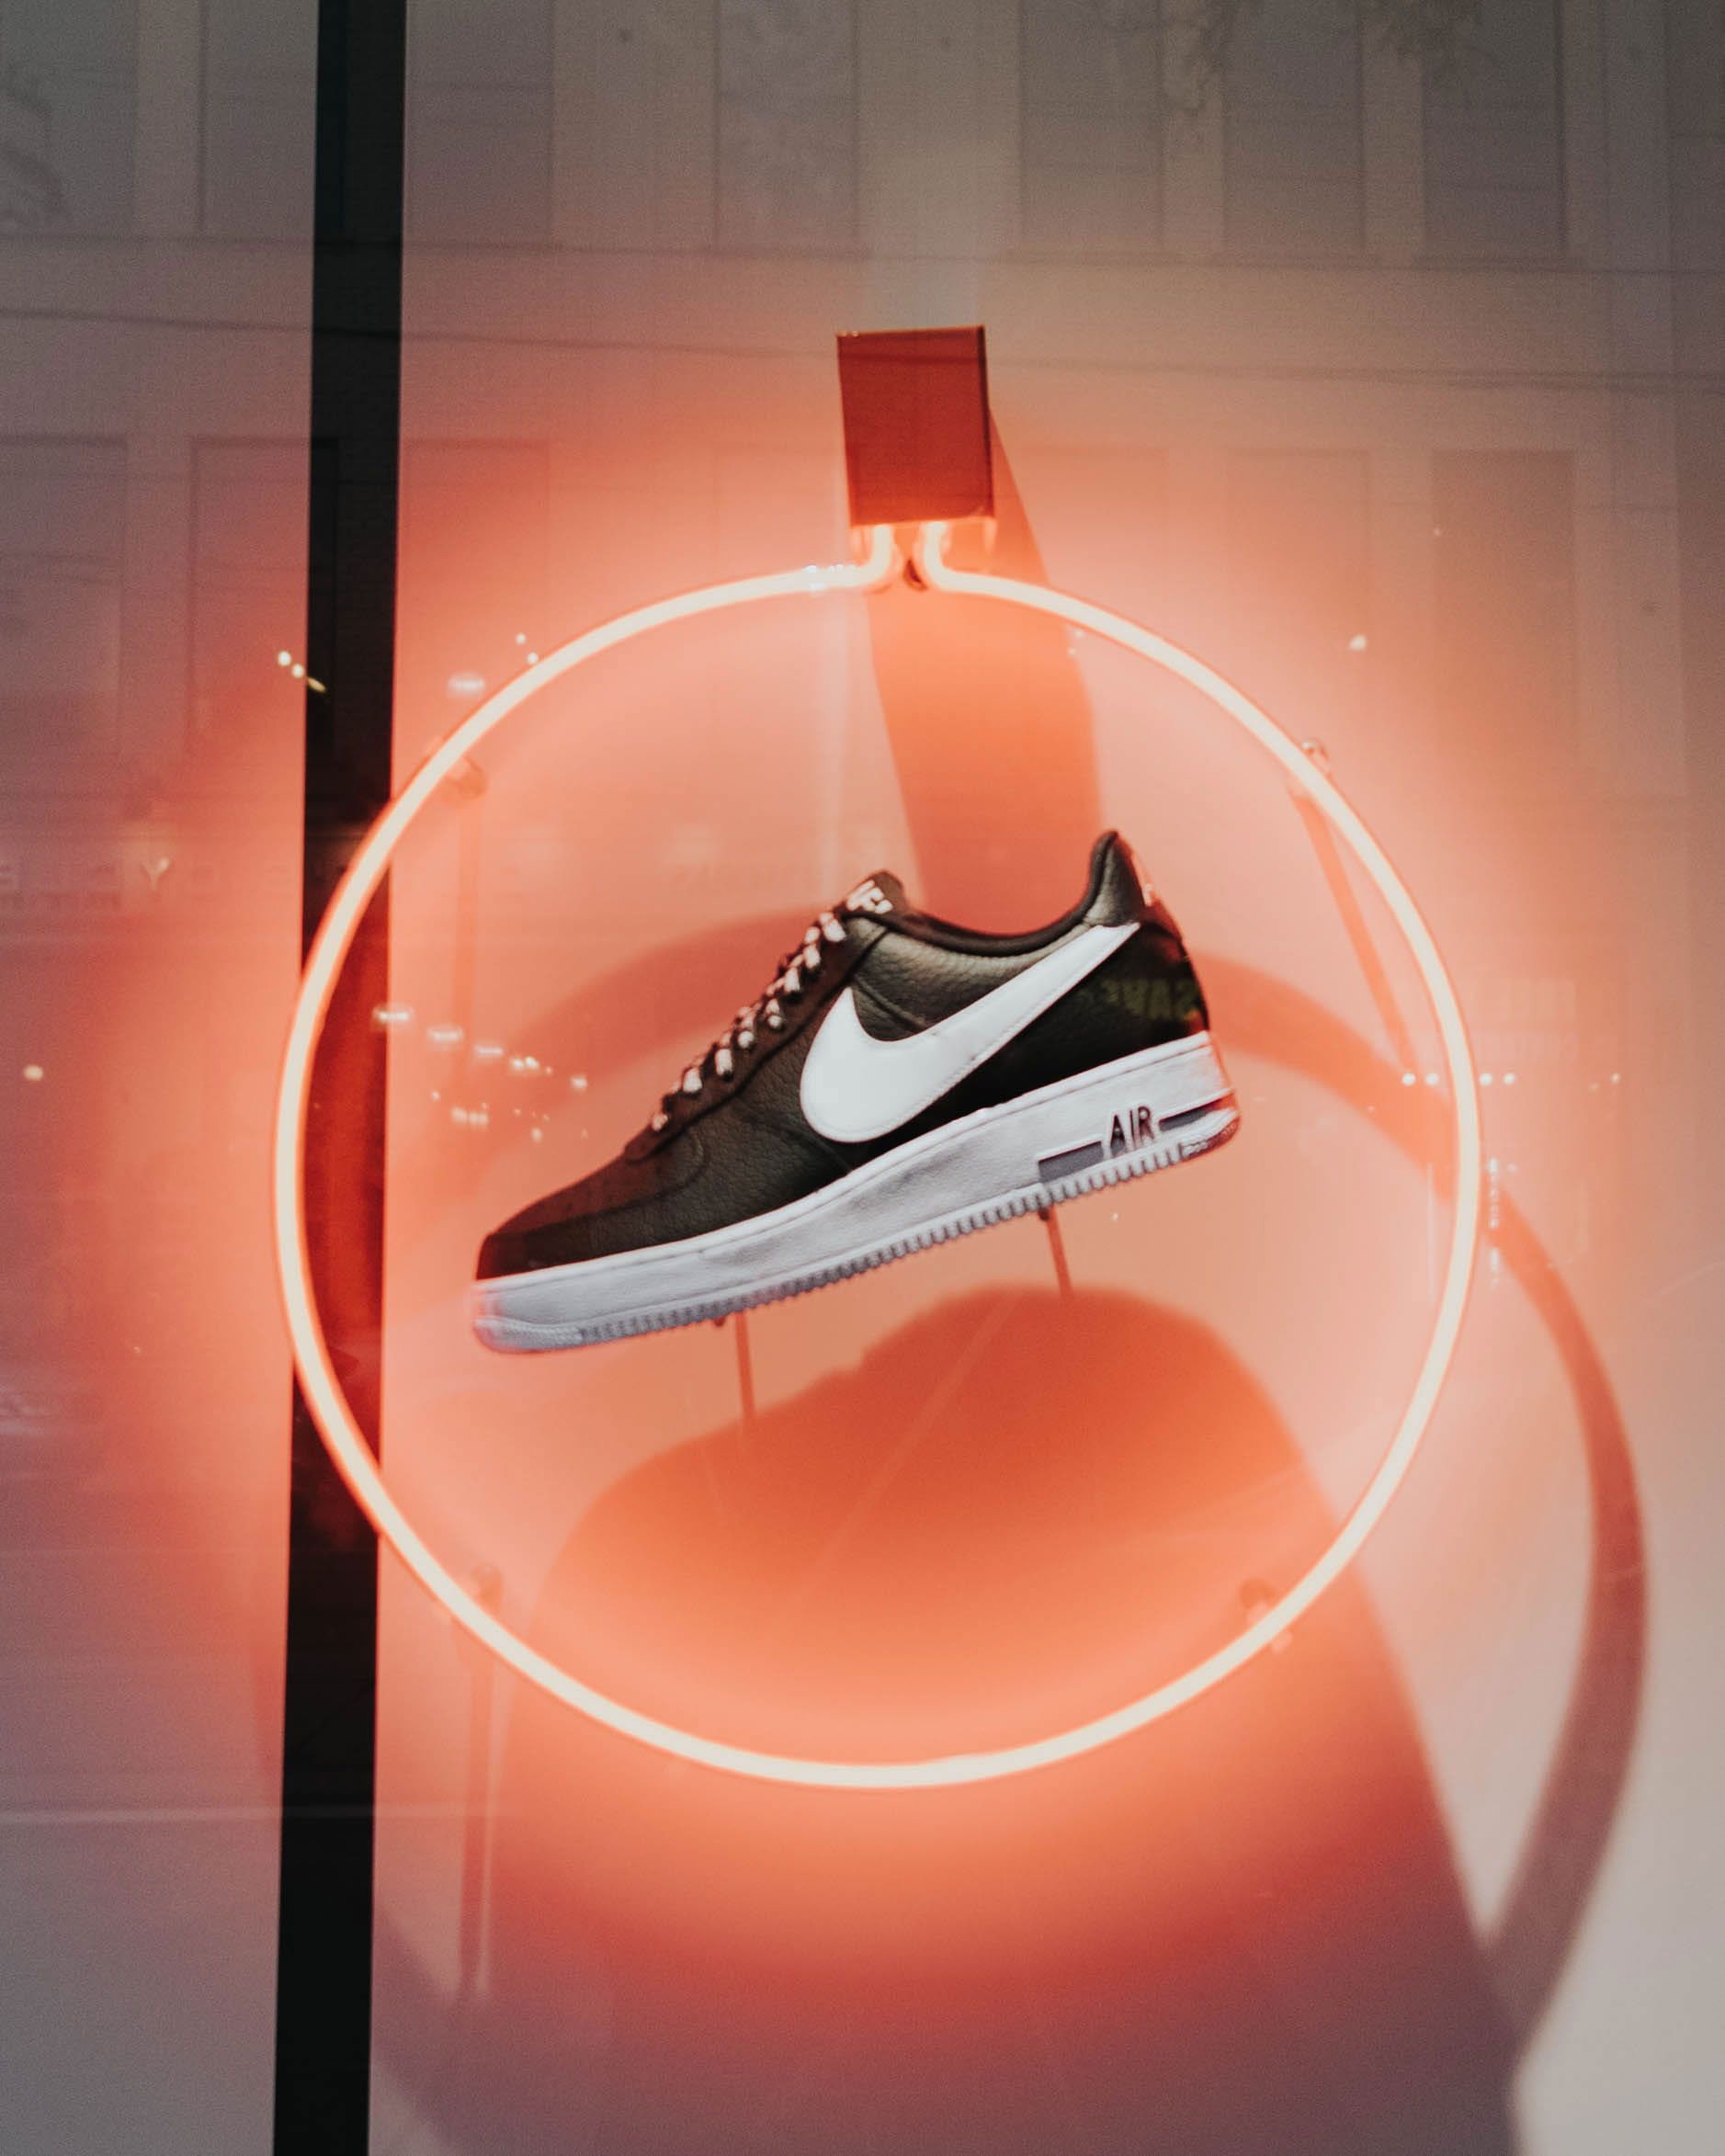 A pair of black and white Nike sneakers on display in a store window. - Neon orange, shoes, Nike